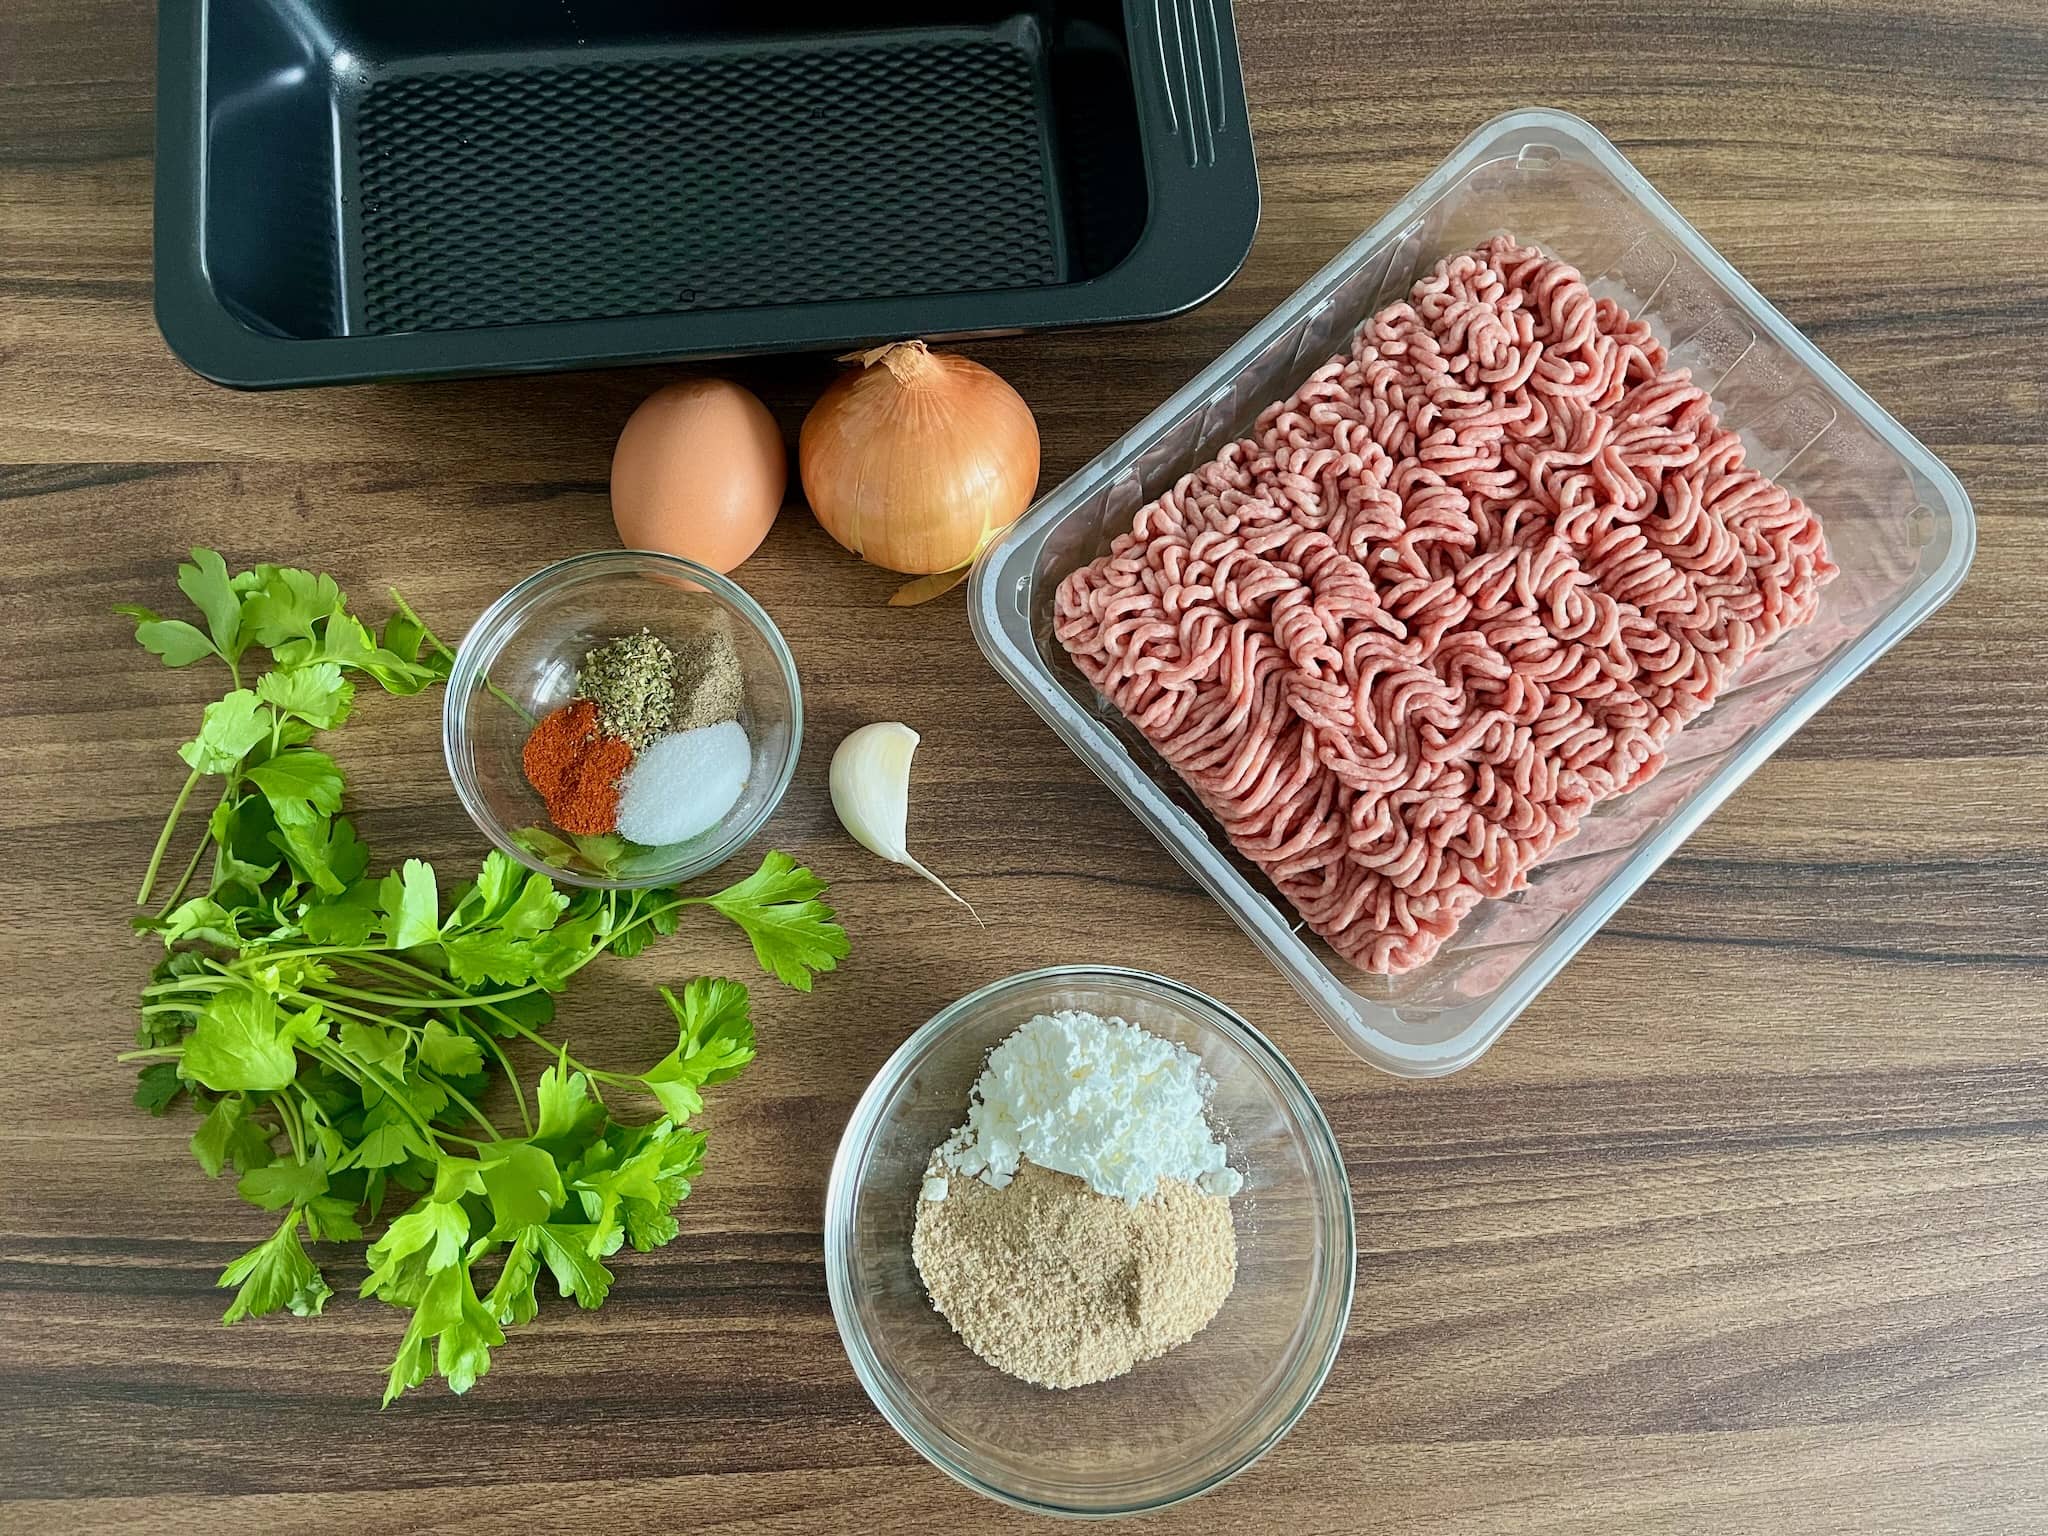 All ingredients for meatloaf ready to make meatloaf